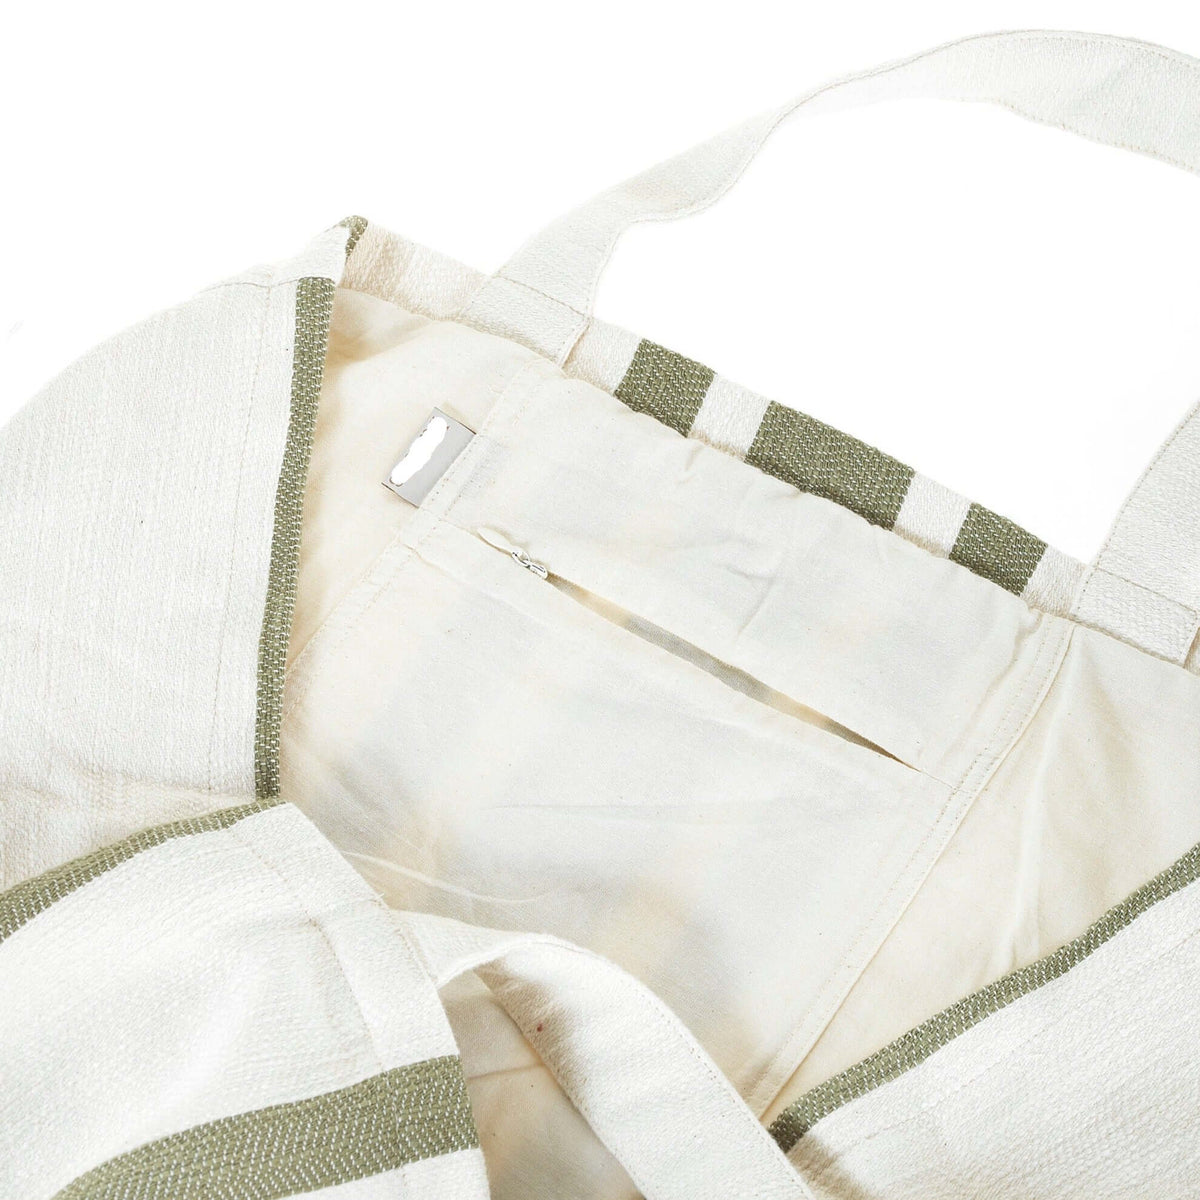 extra large cotton beach bag, green stripes on off white with zipped inside poach 